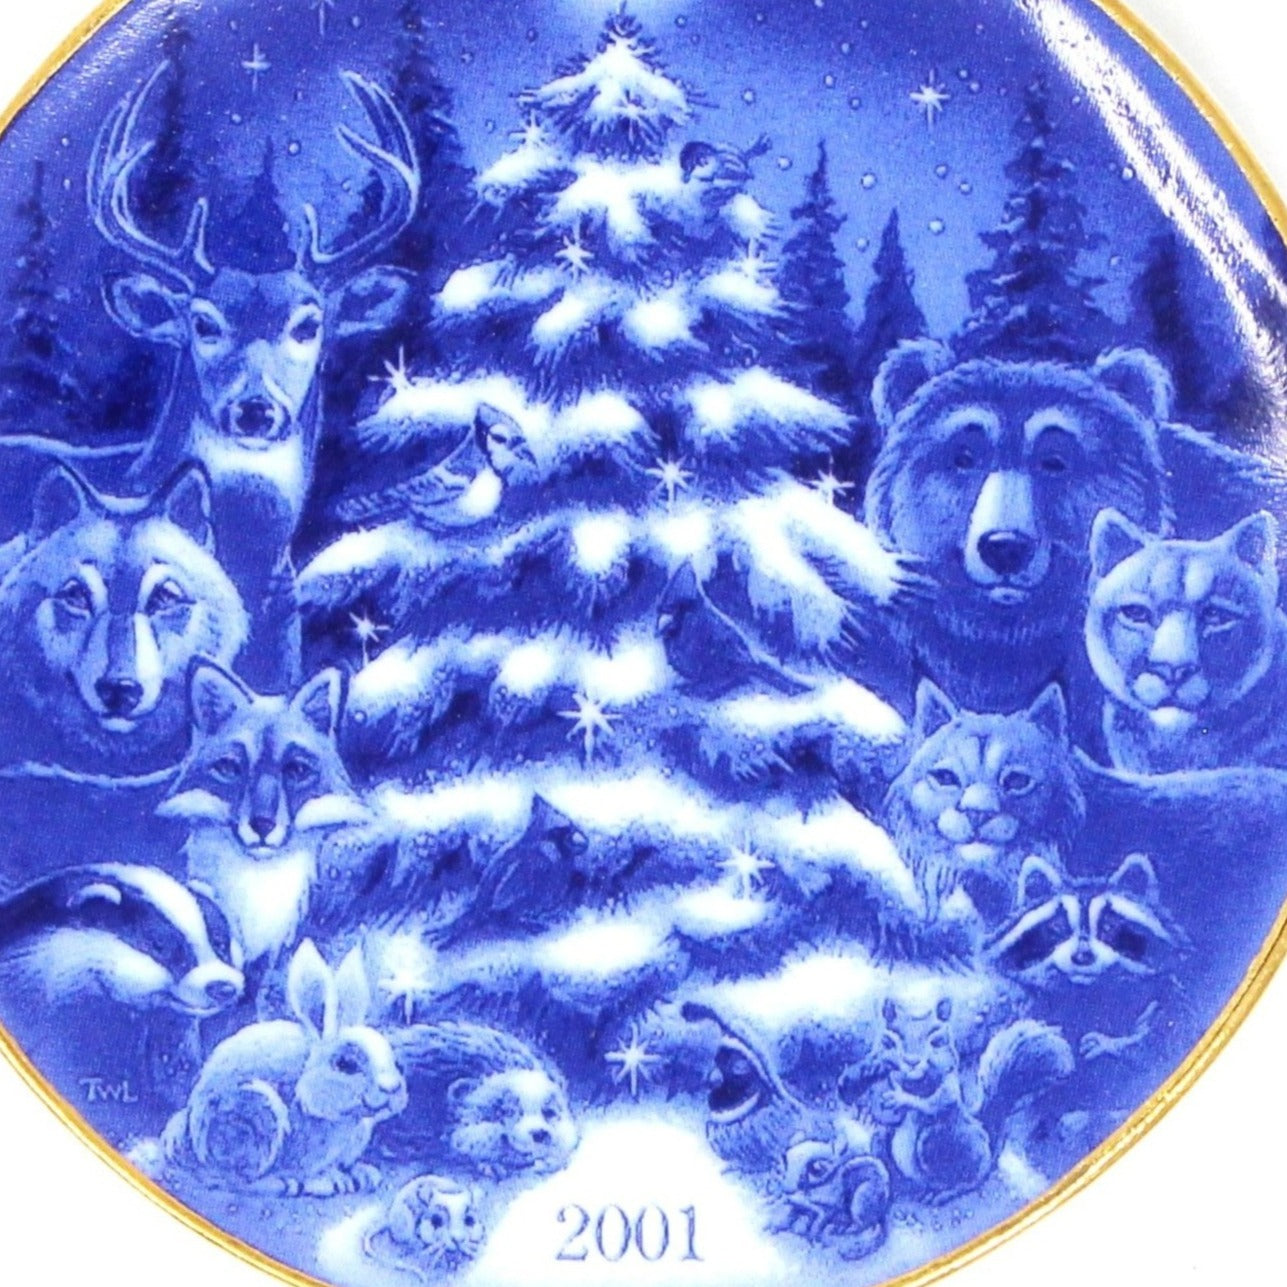 Ornament, Hallmark Keepsake, Christmas Keeps Us Together, Blue Collector's Plate with stand, In Box, 2001